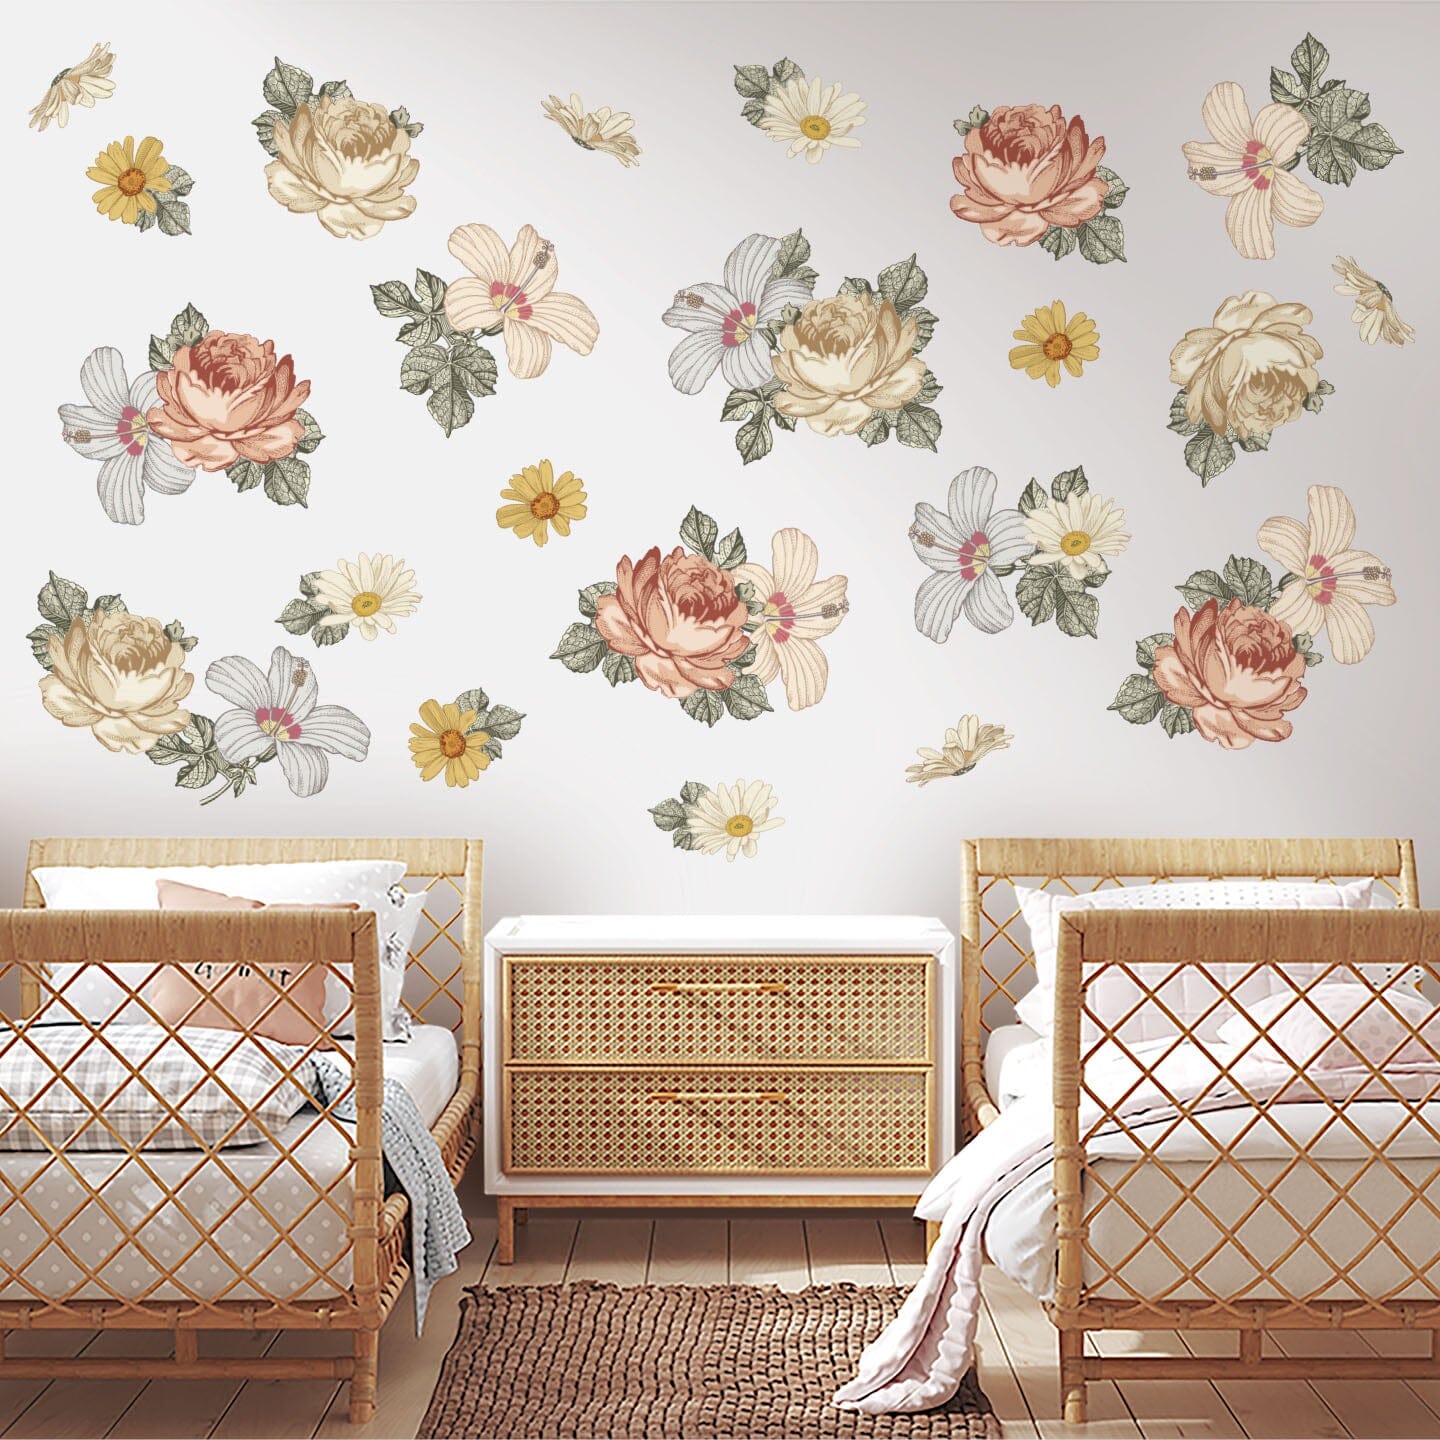 Wildflower Fabric Wall Decals, Boho Floral Decals for Girls